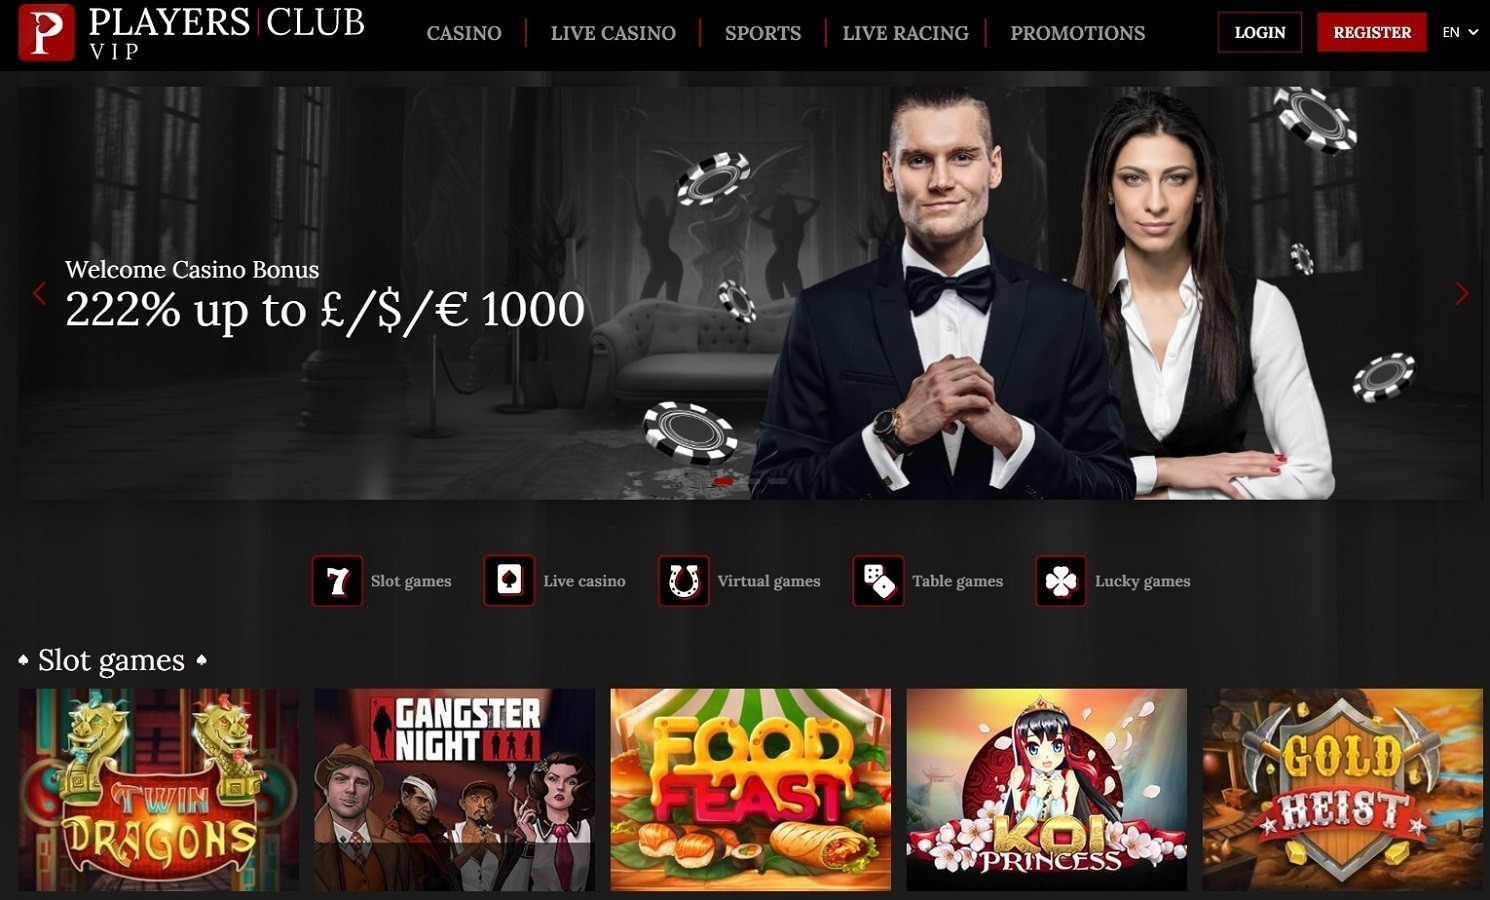 About Players Club VIP Casino